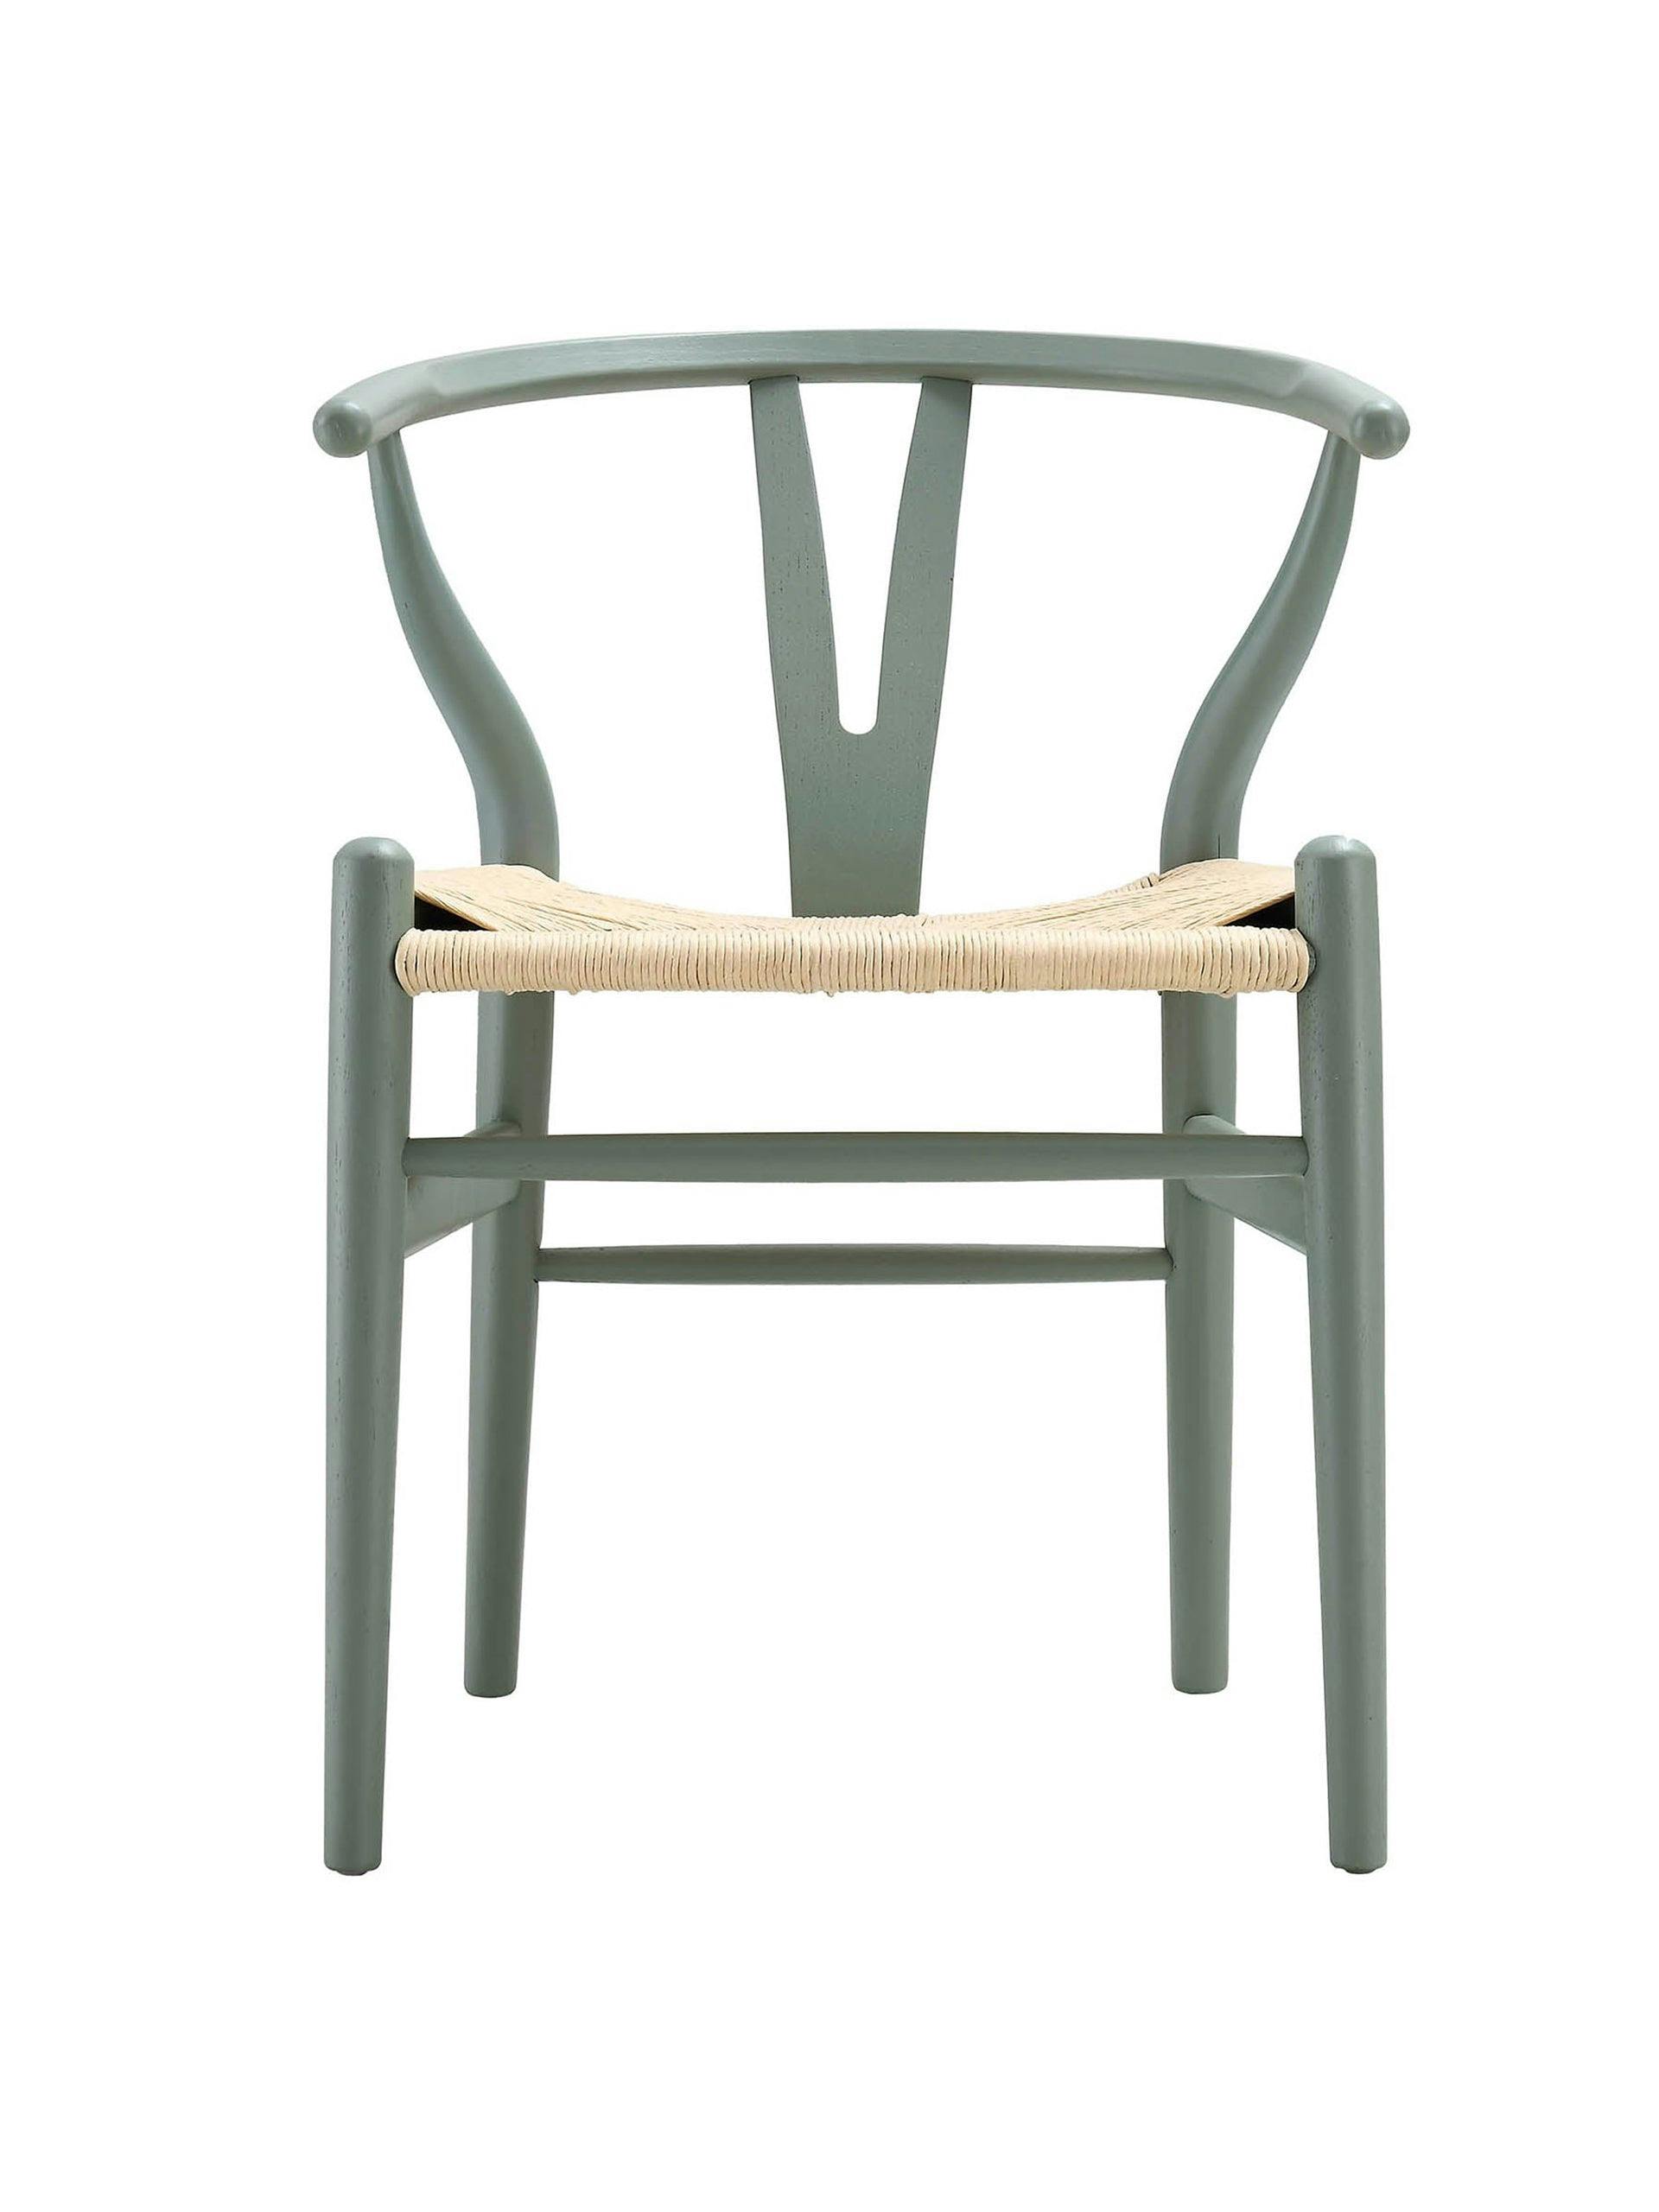 Wooden chair with weaved seat pad in sage green